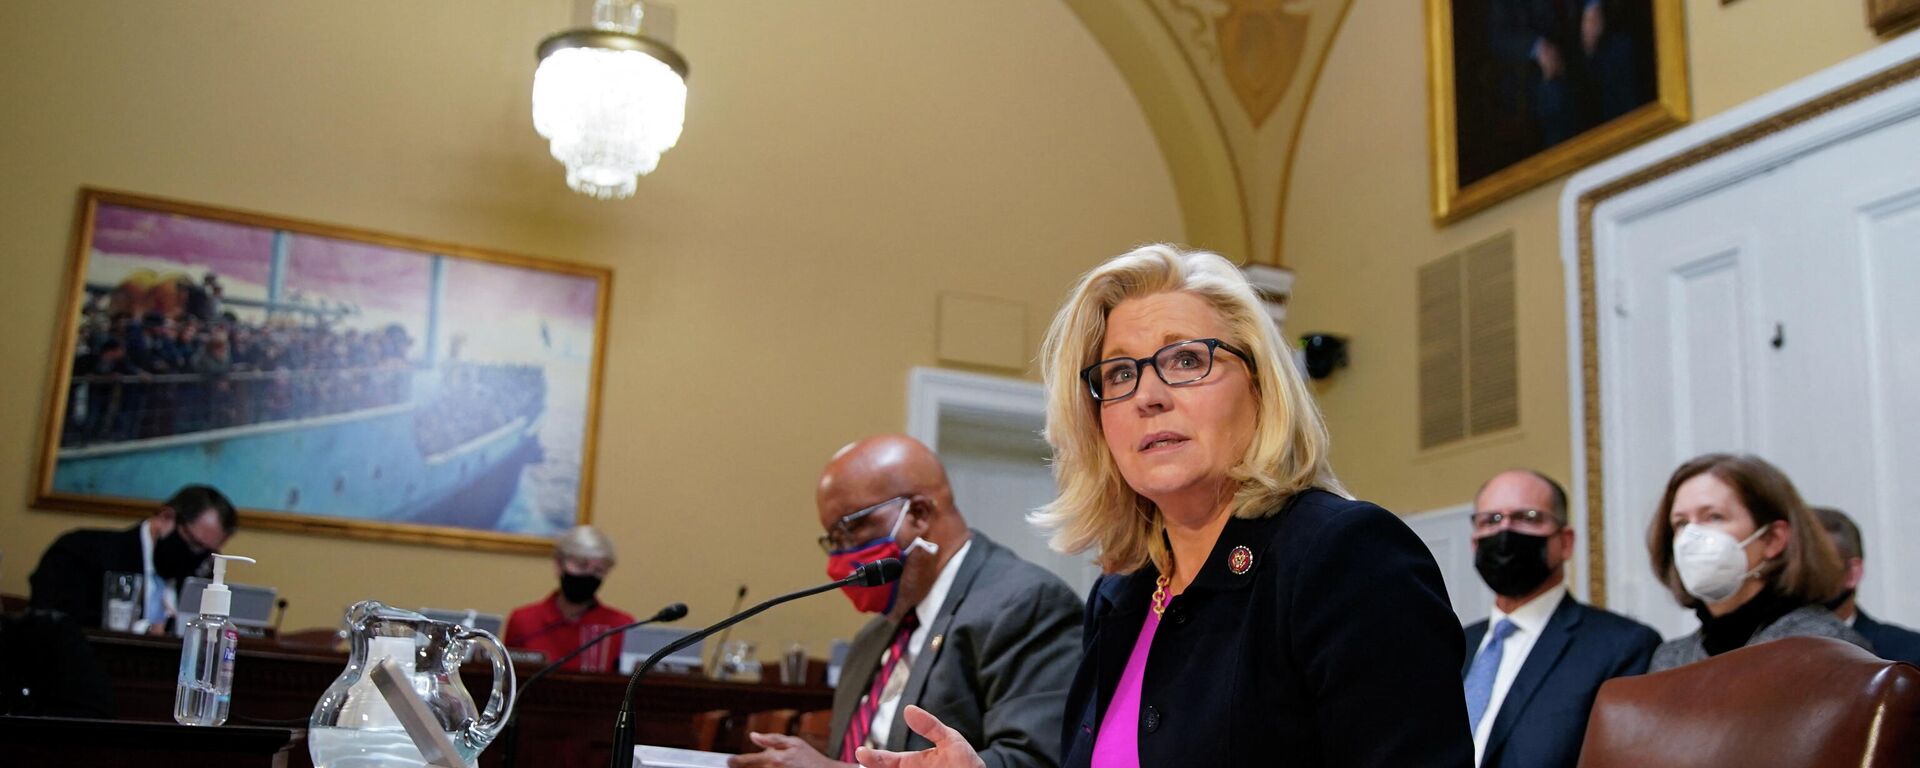 U.S. Representative Liz Cheney (R-WY) testifies before the House Rules Committee about the January 6th Select Committee recommendation that the House hold Mark Meadows in criminal contempt of Congress at the U.S. Capitol building in Washington, U.S., December 14, 2021 - Sputnik International, 1920, 02.01.2022